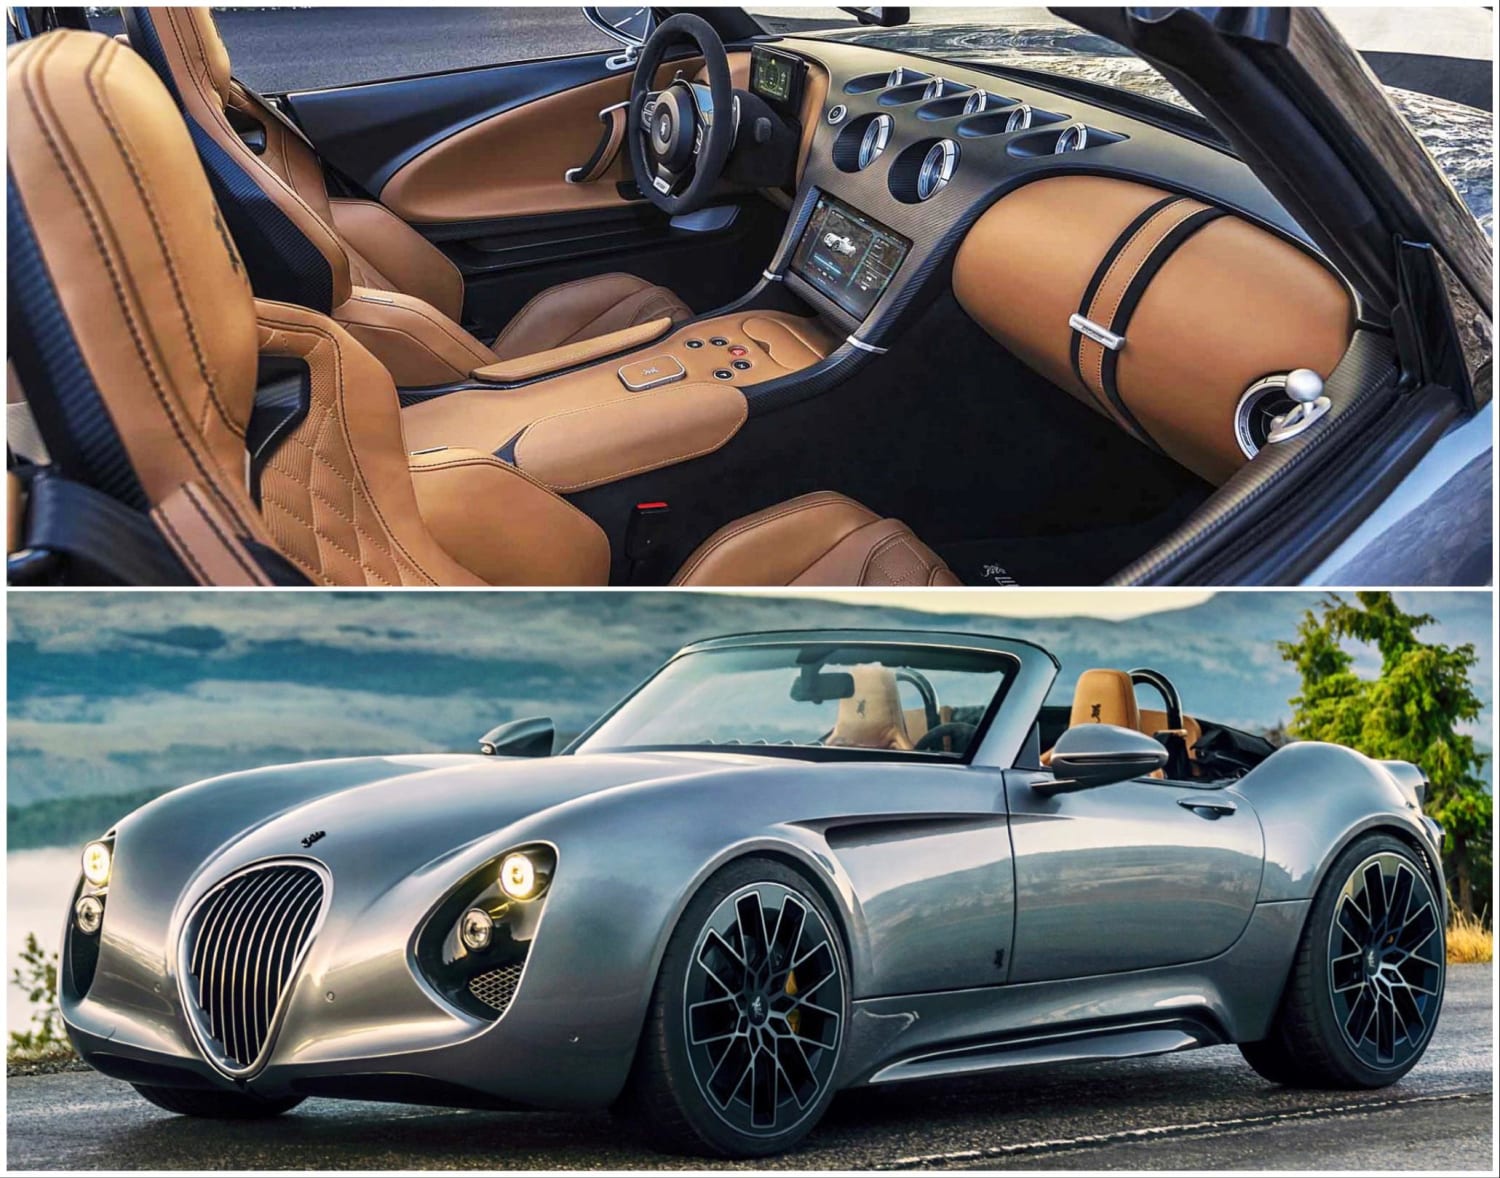 Wiesmann Thunderball, 2022. A new electric roadster from the German specialist car maker who have, in the past, made retro-styled sports cars based on BMW mechanical parts.